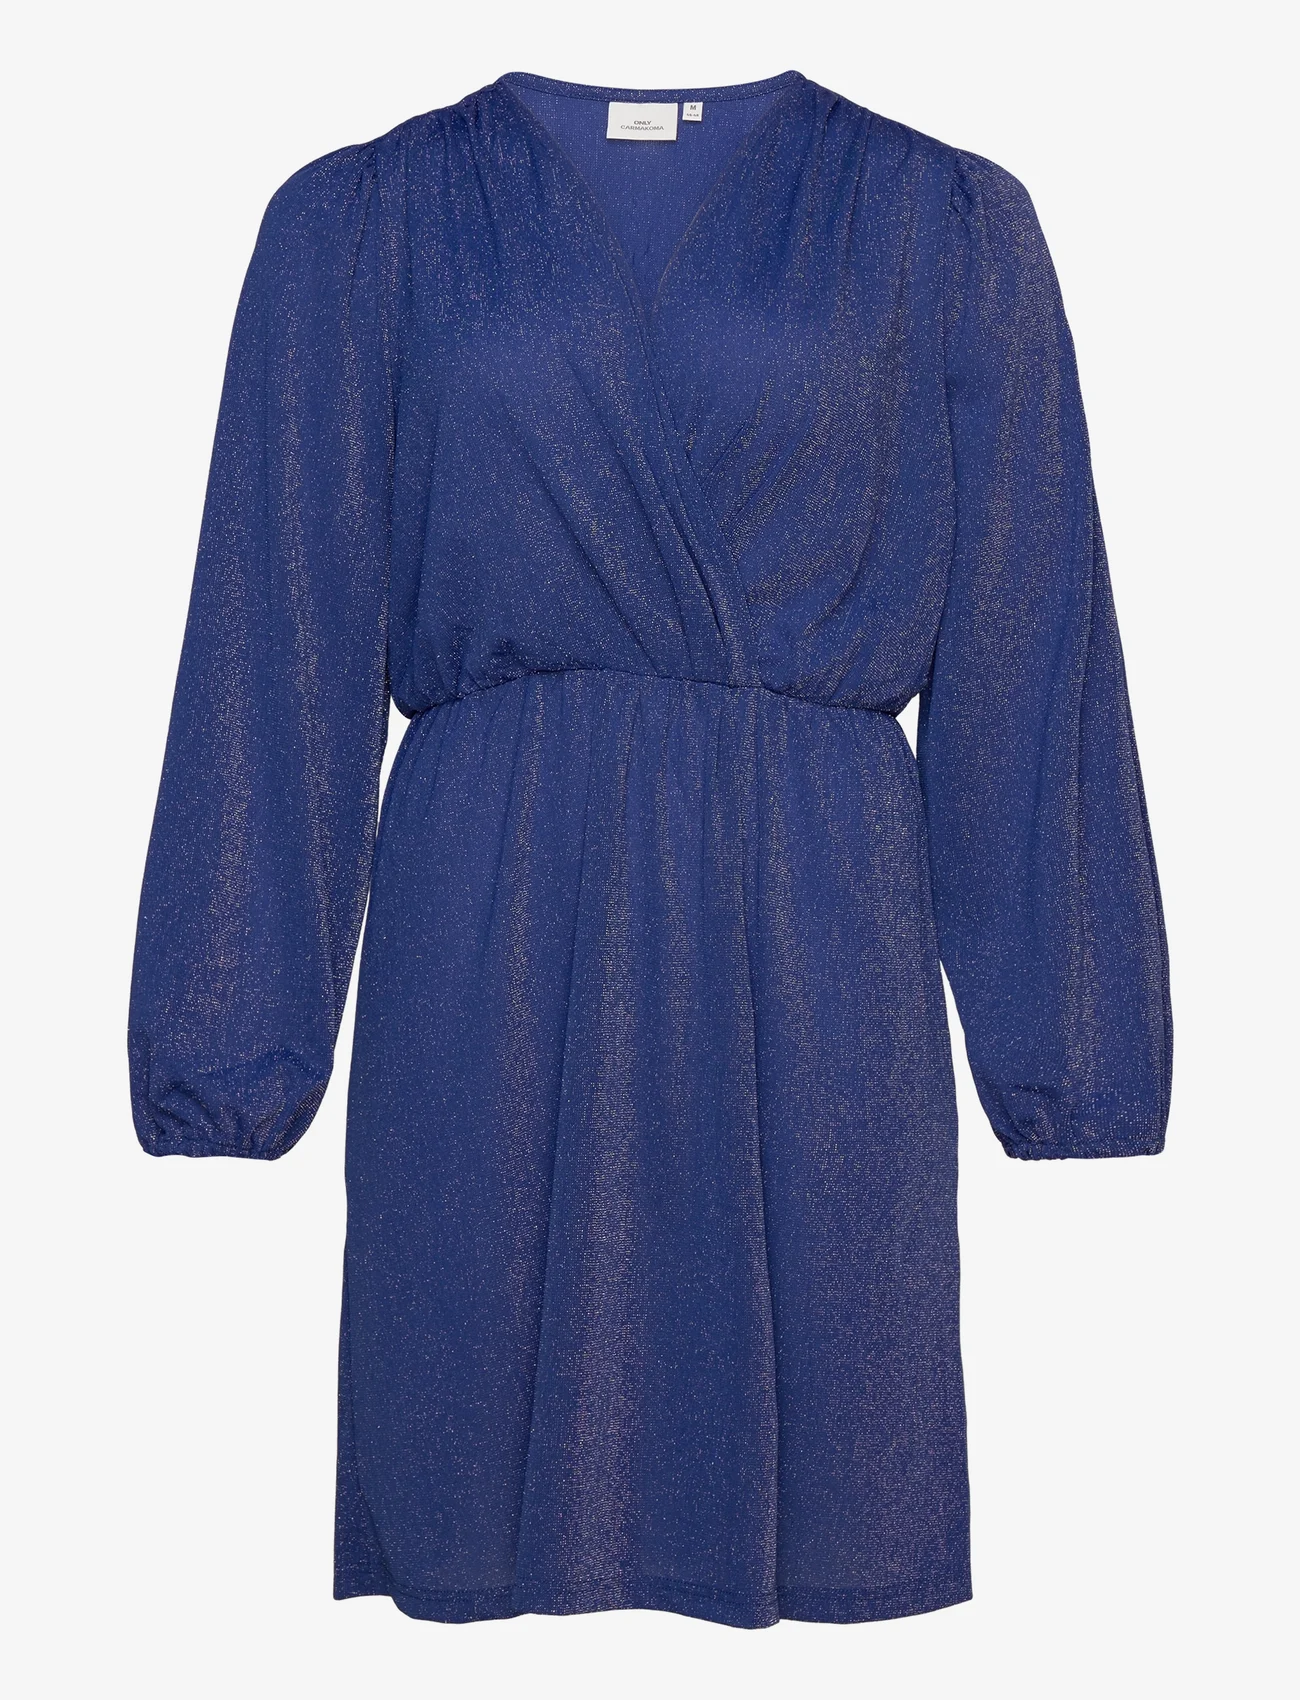 ONLY Carmakoma - CARFIESTA L/S V-NECK GLITTER DRESS JRS - party wear at outlet prices - bluing - 0